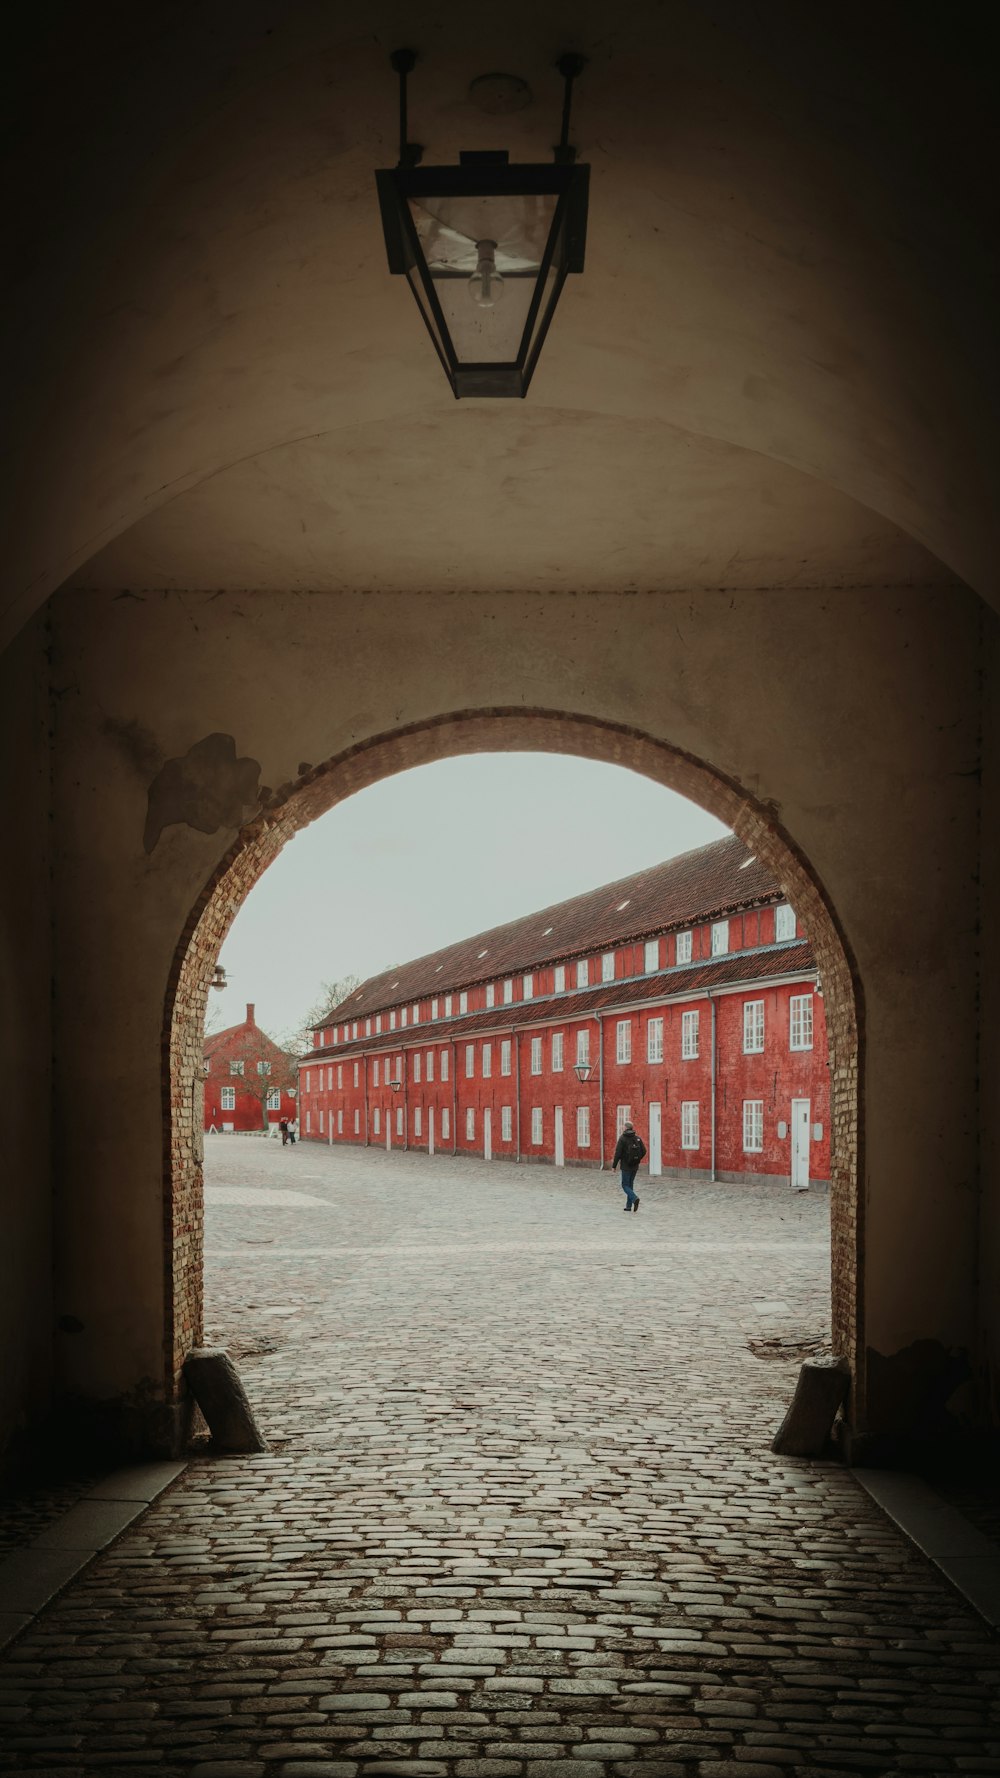 a person walking through an archway in a brick building